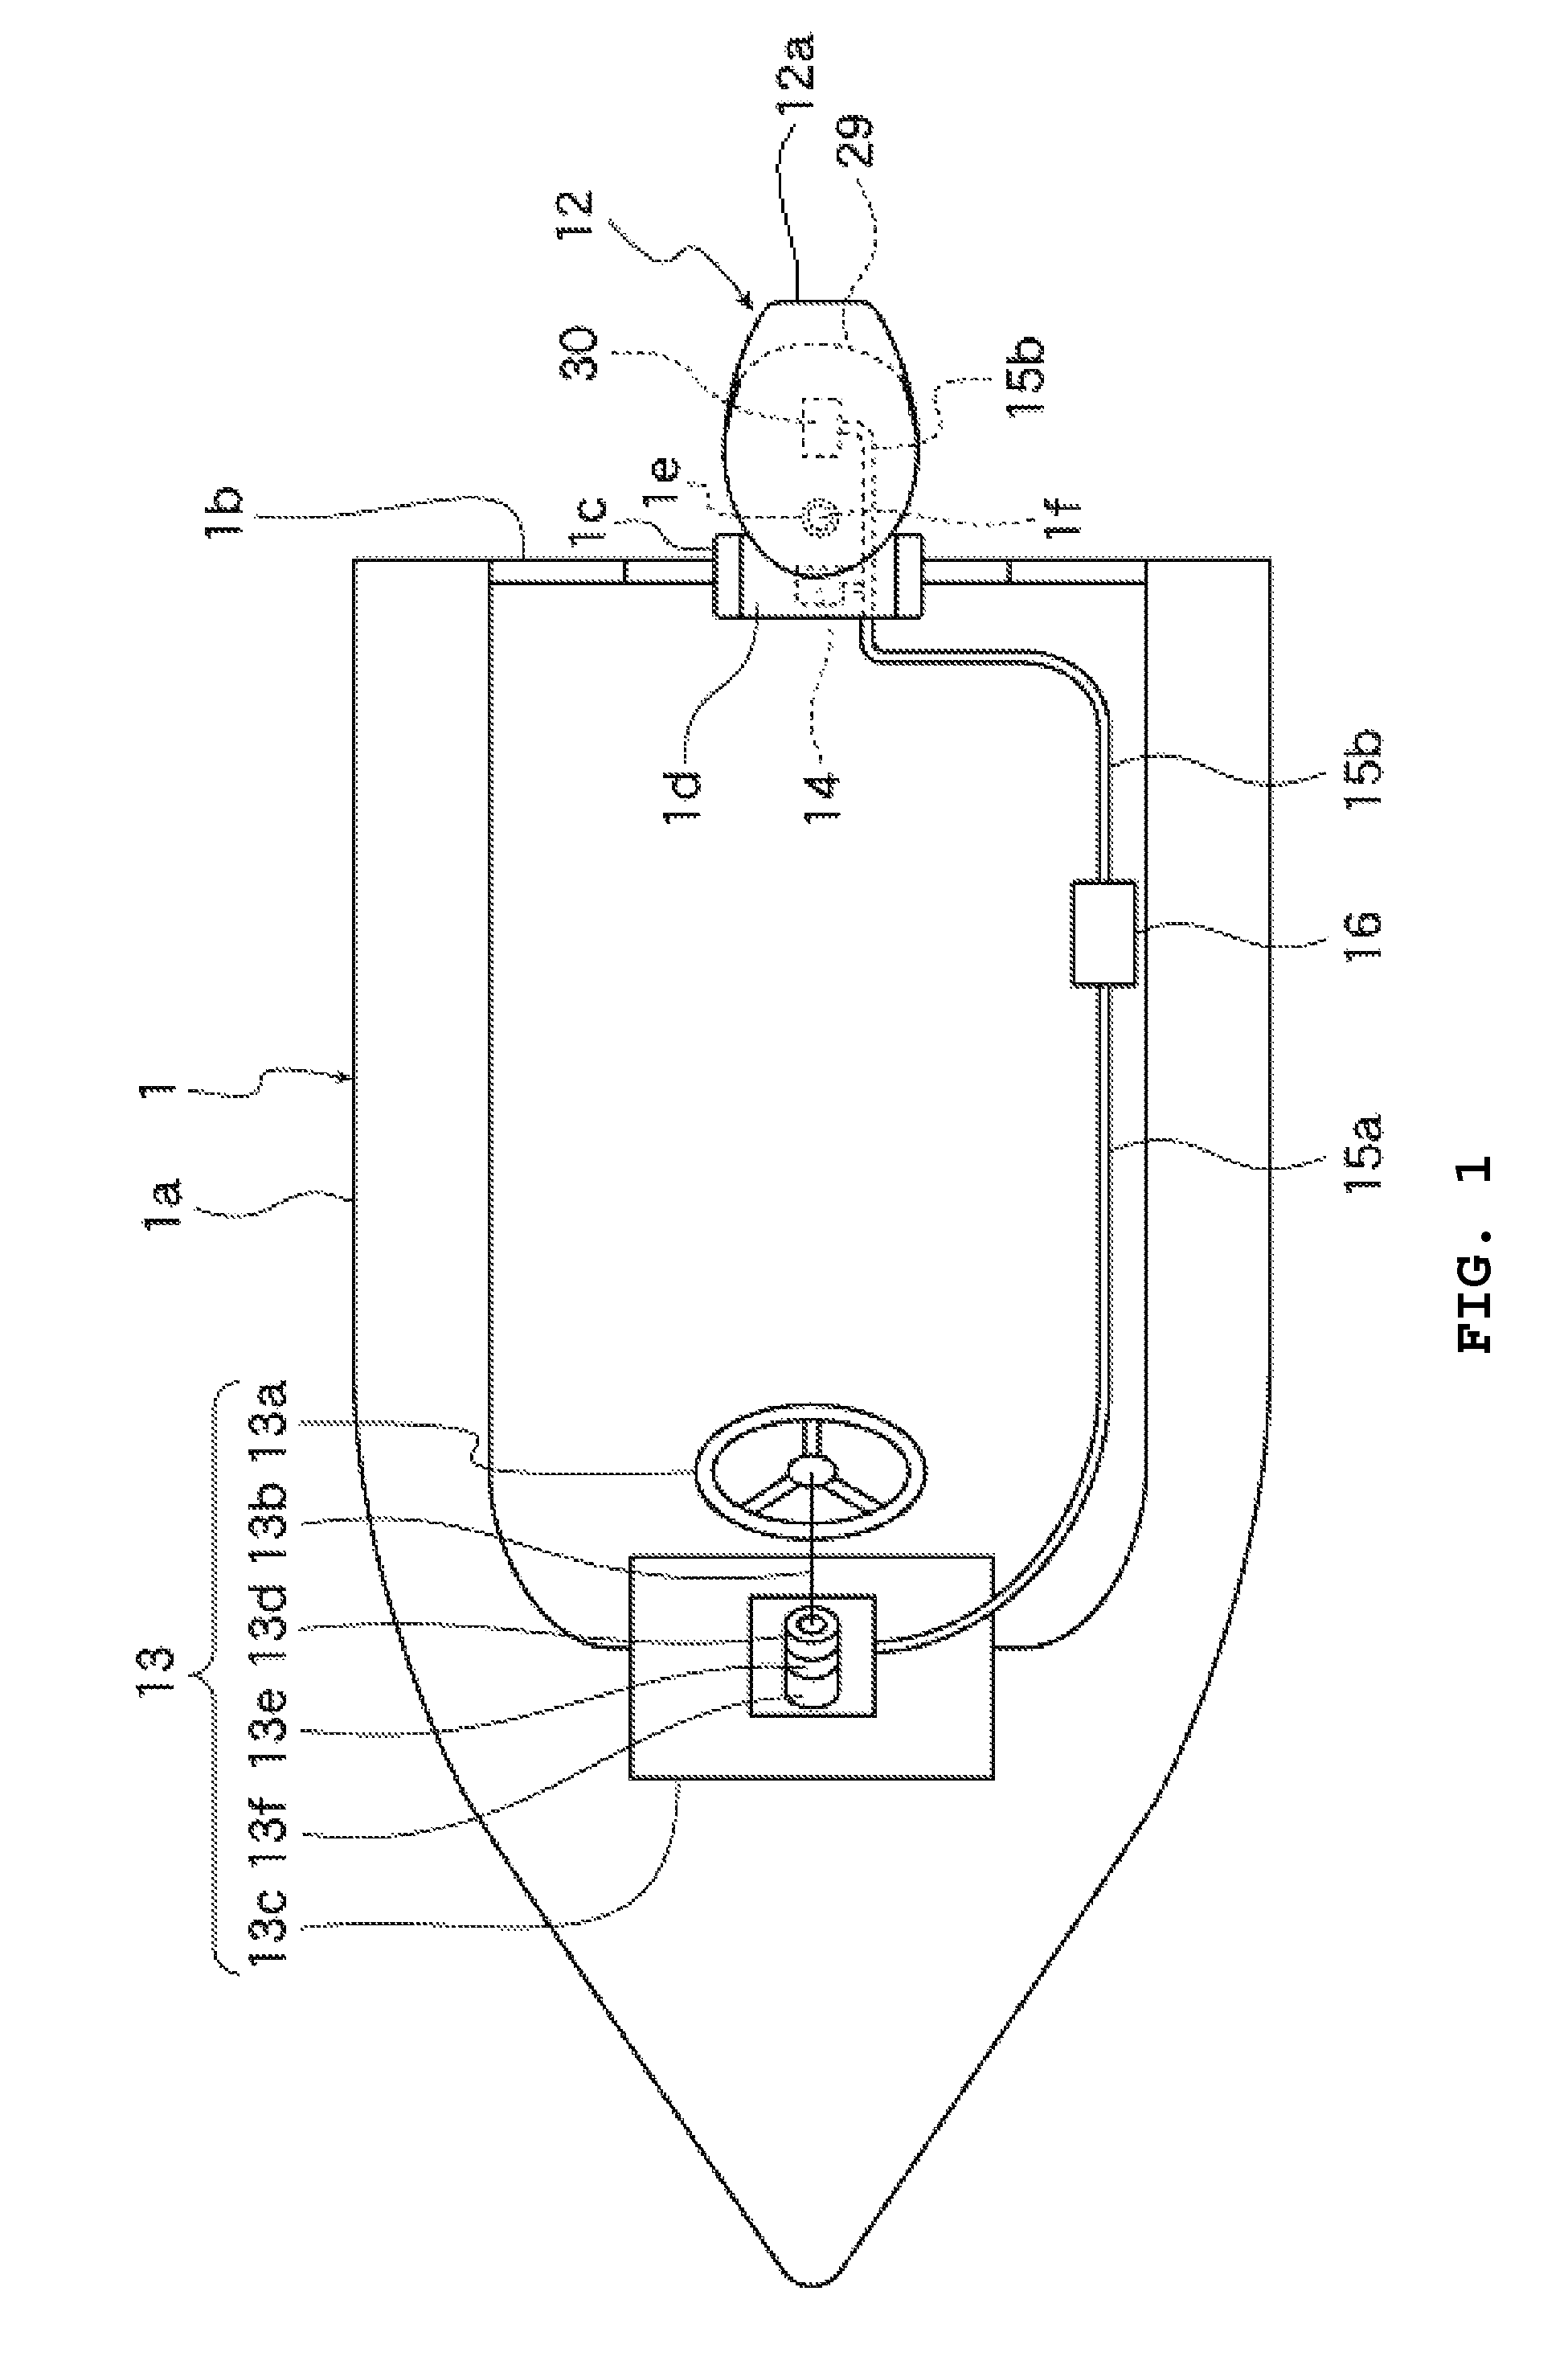 Boat including steering load control